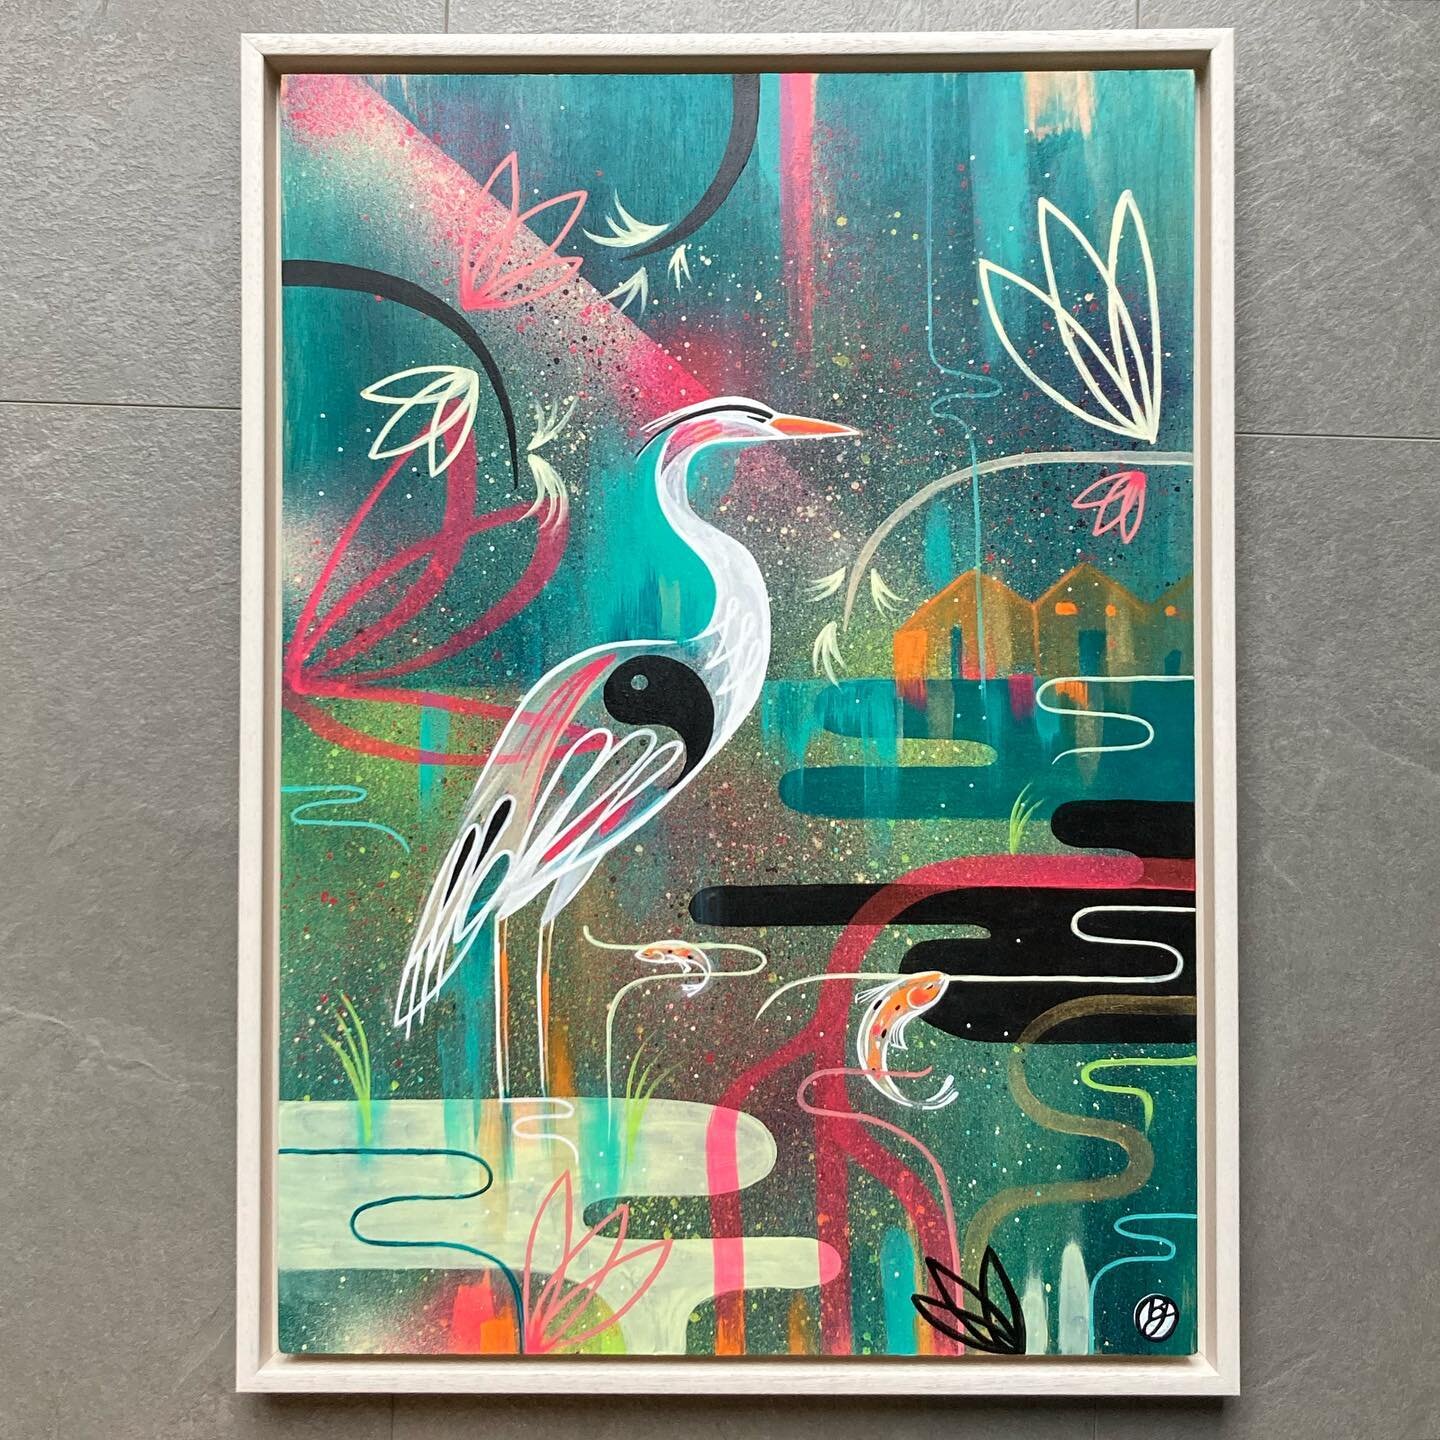 &ldquo;Waiting in the Reeds&rdquo; is now up on my shop (see the link in my bio). 

Spray paint and acrylic on wooden canvas, framed in an ivory stained wooden frame. Finished in a gloss varnish. Size 475 x 632. 

#bexgloverart #heronpainting #birdpa